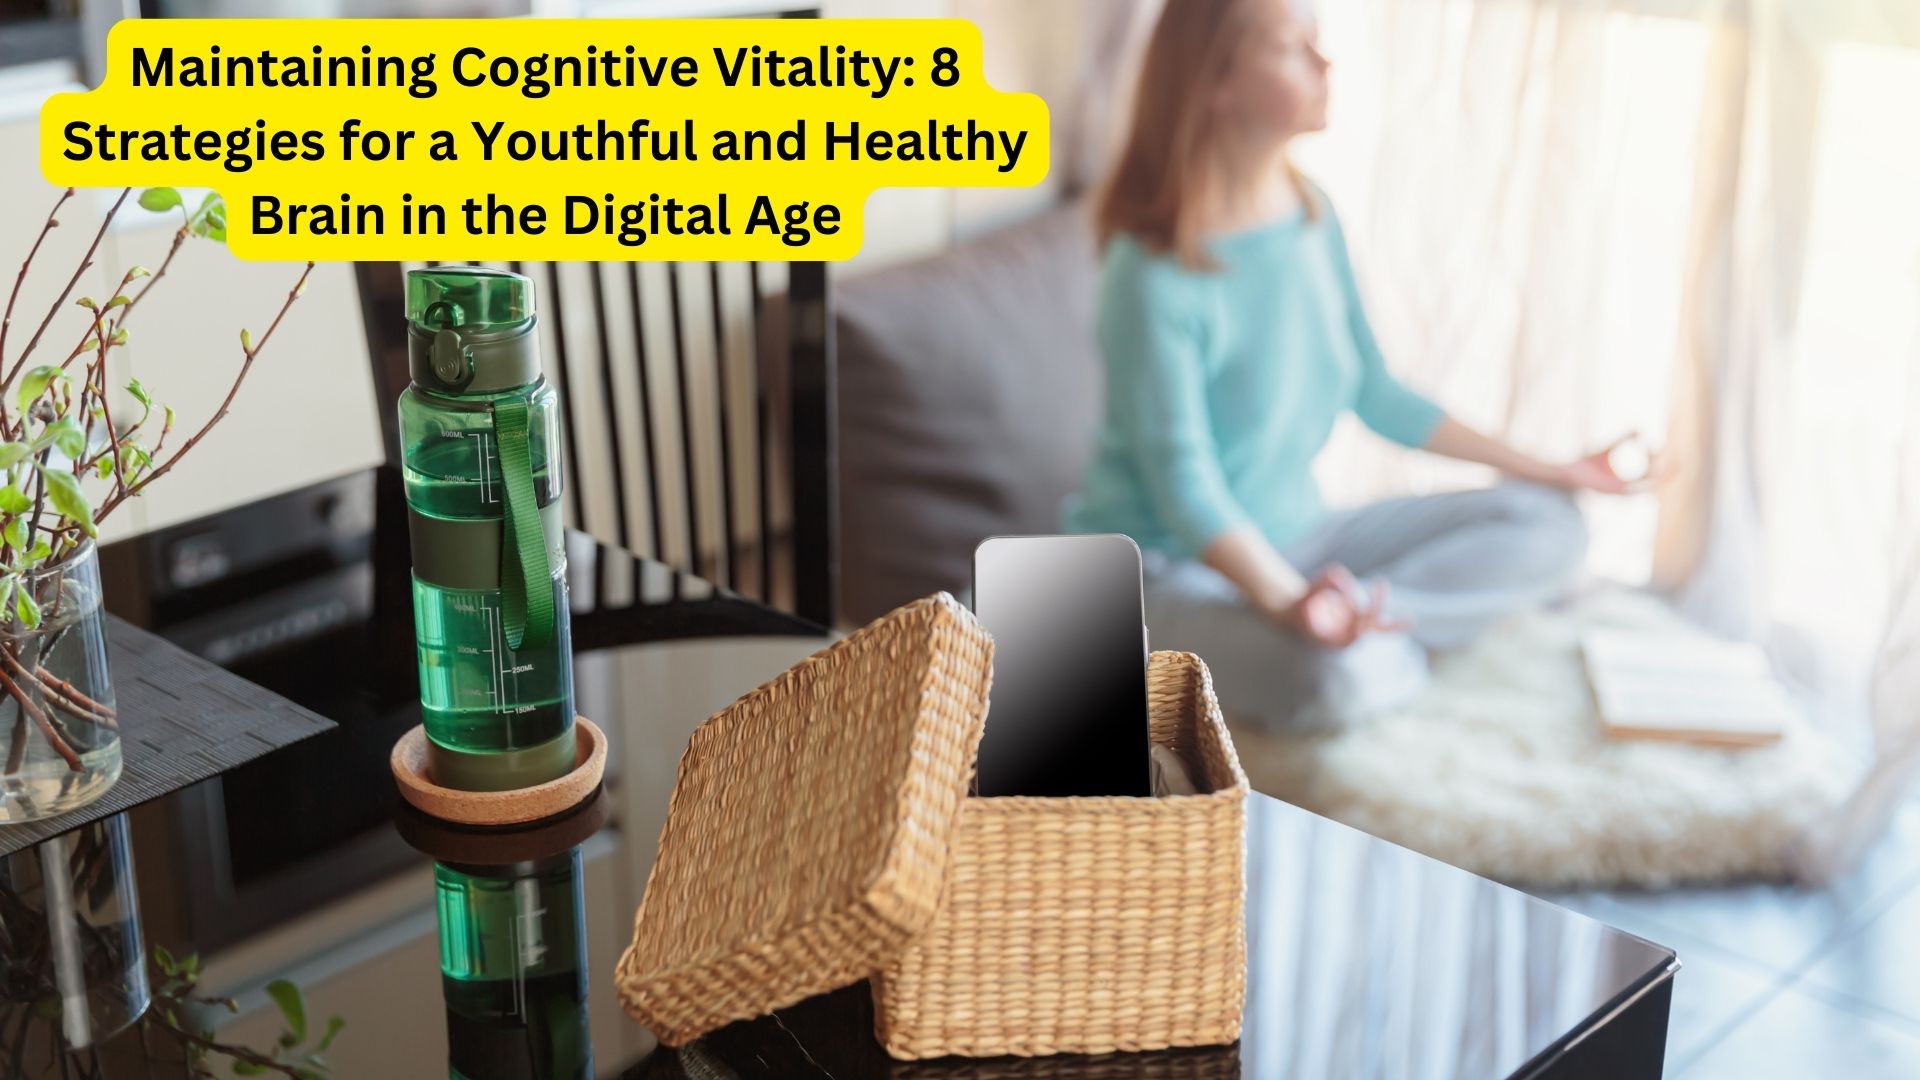 Maintaining Cognitive Vitality: 8 Strategies for a Youthful and Healthy Brain in the Digital Age